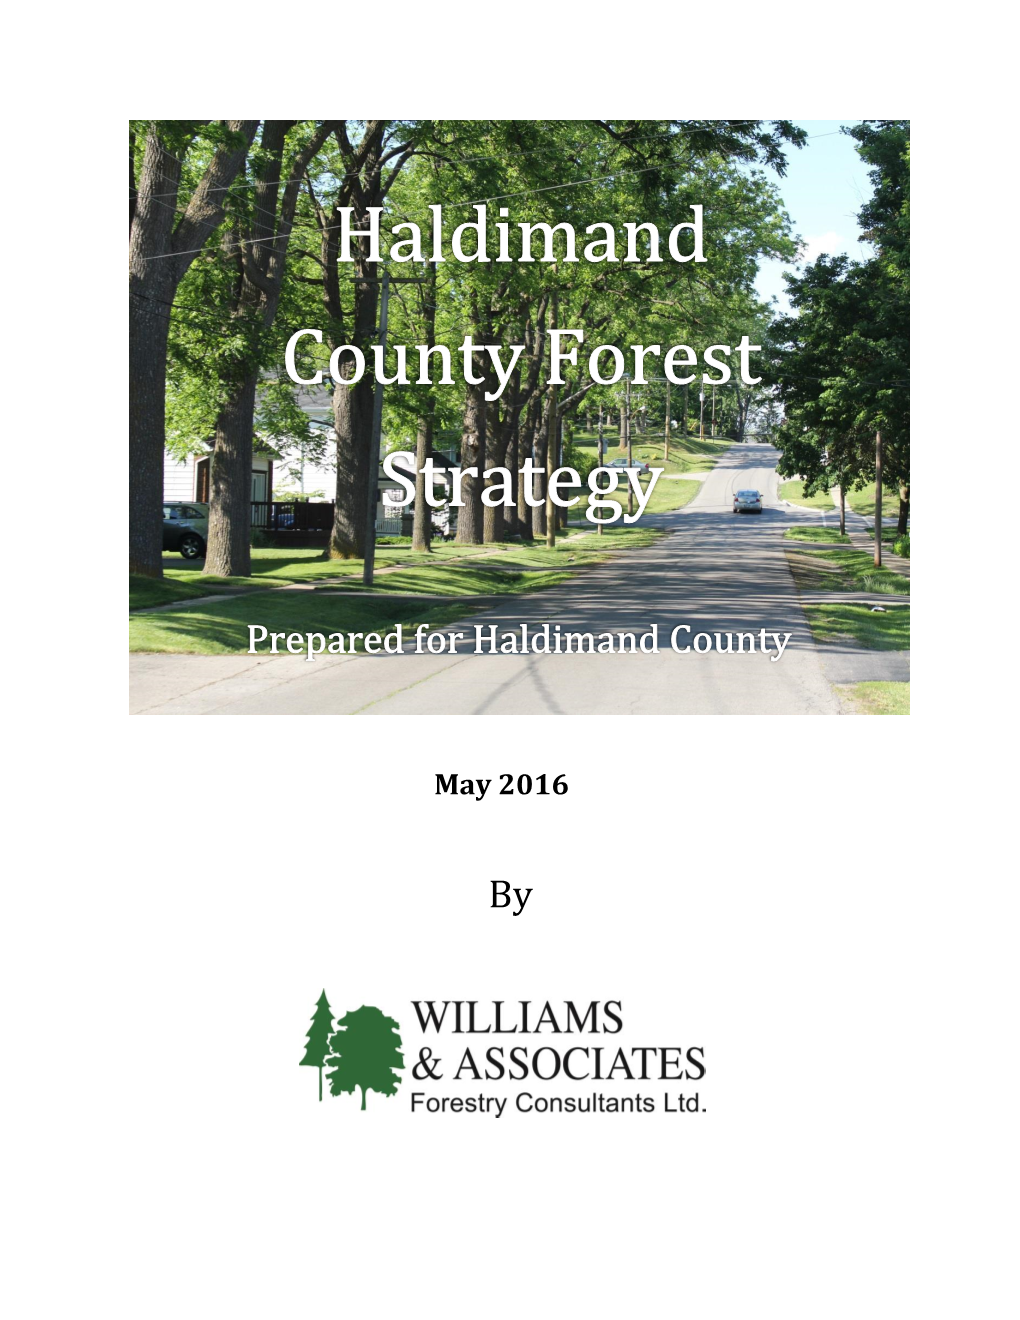 Haldimand County Forest Strategy